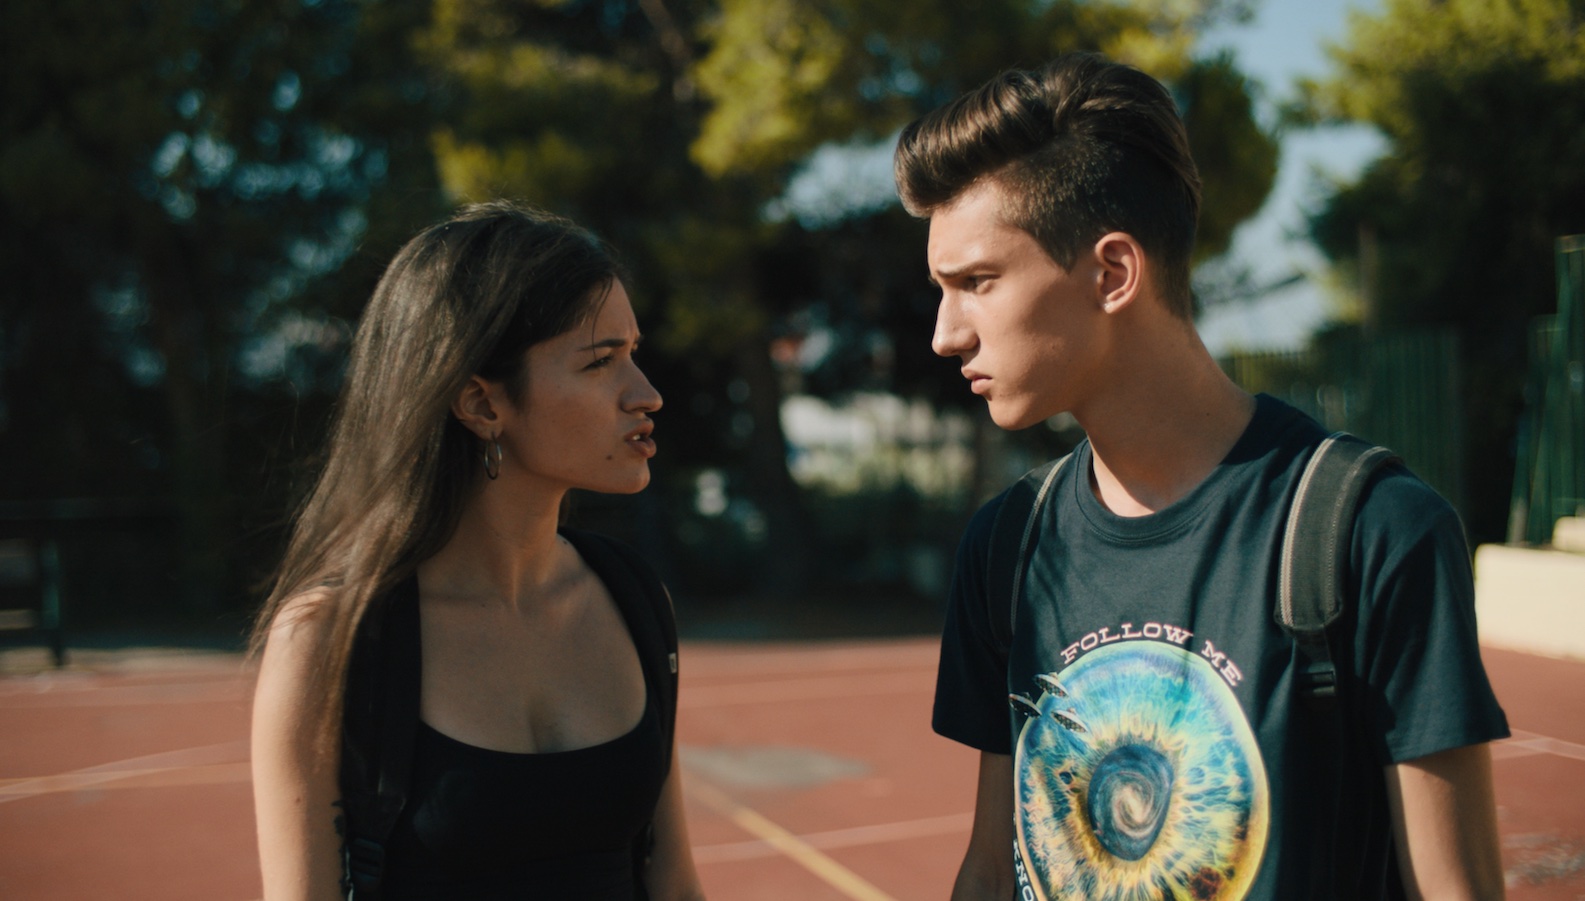 a young man and woman scowl and face each other on an outdoor basketball court